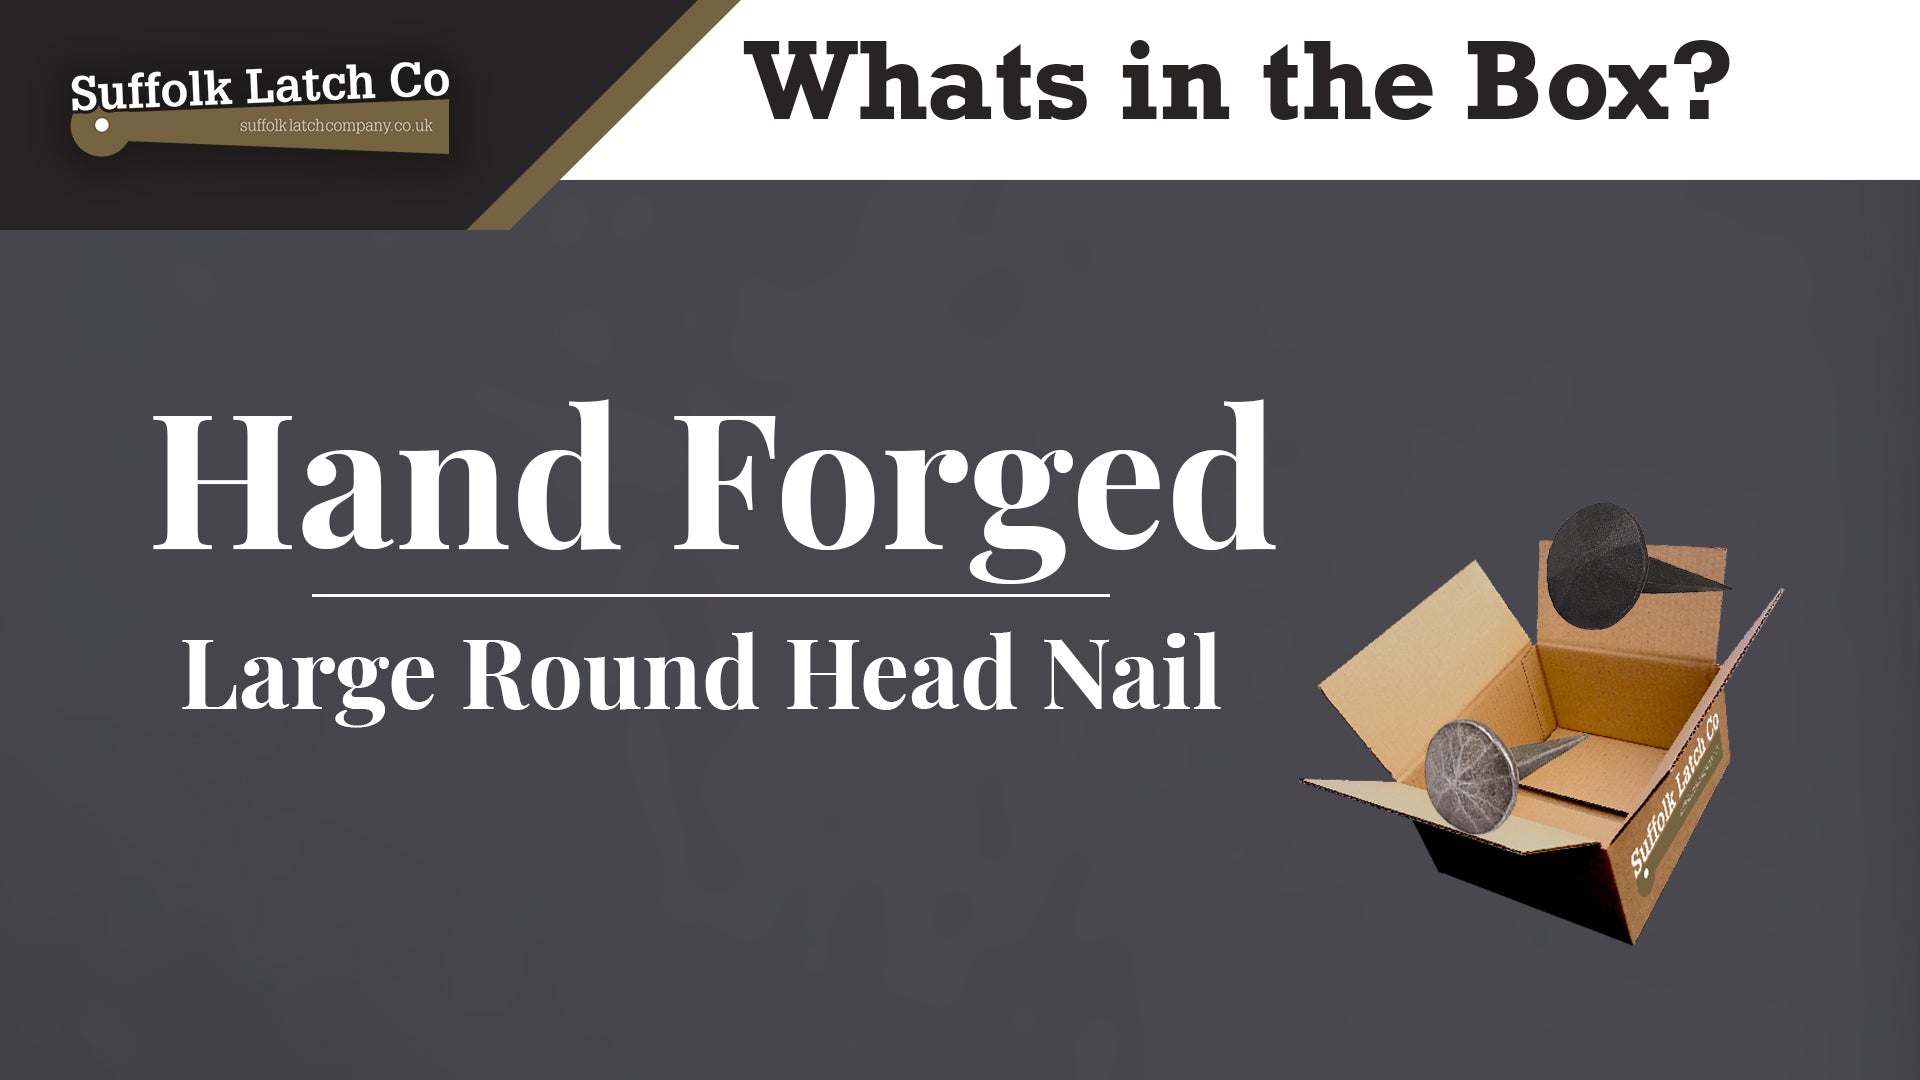 What's in the Box: Hand Forged Nail Large Round Head